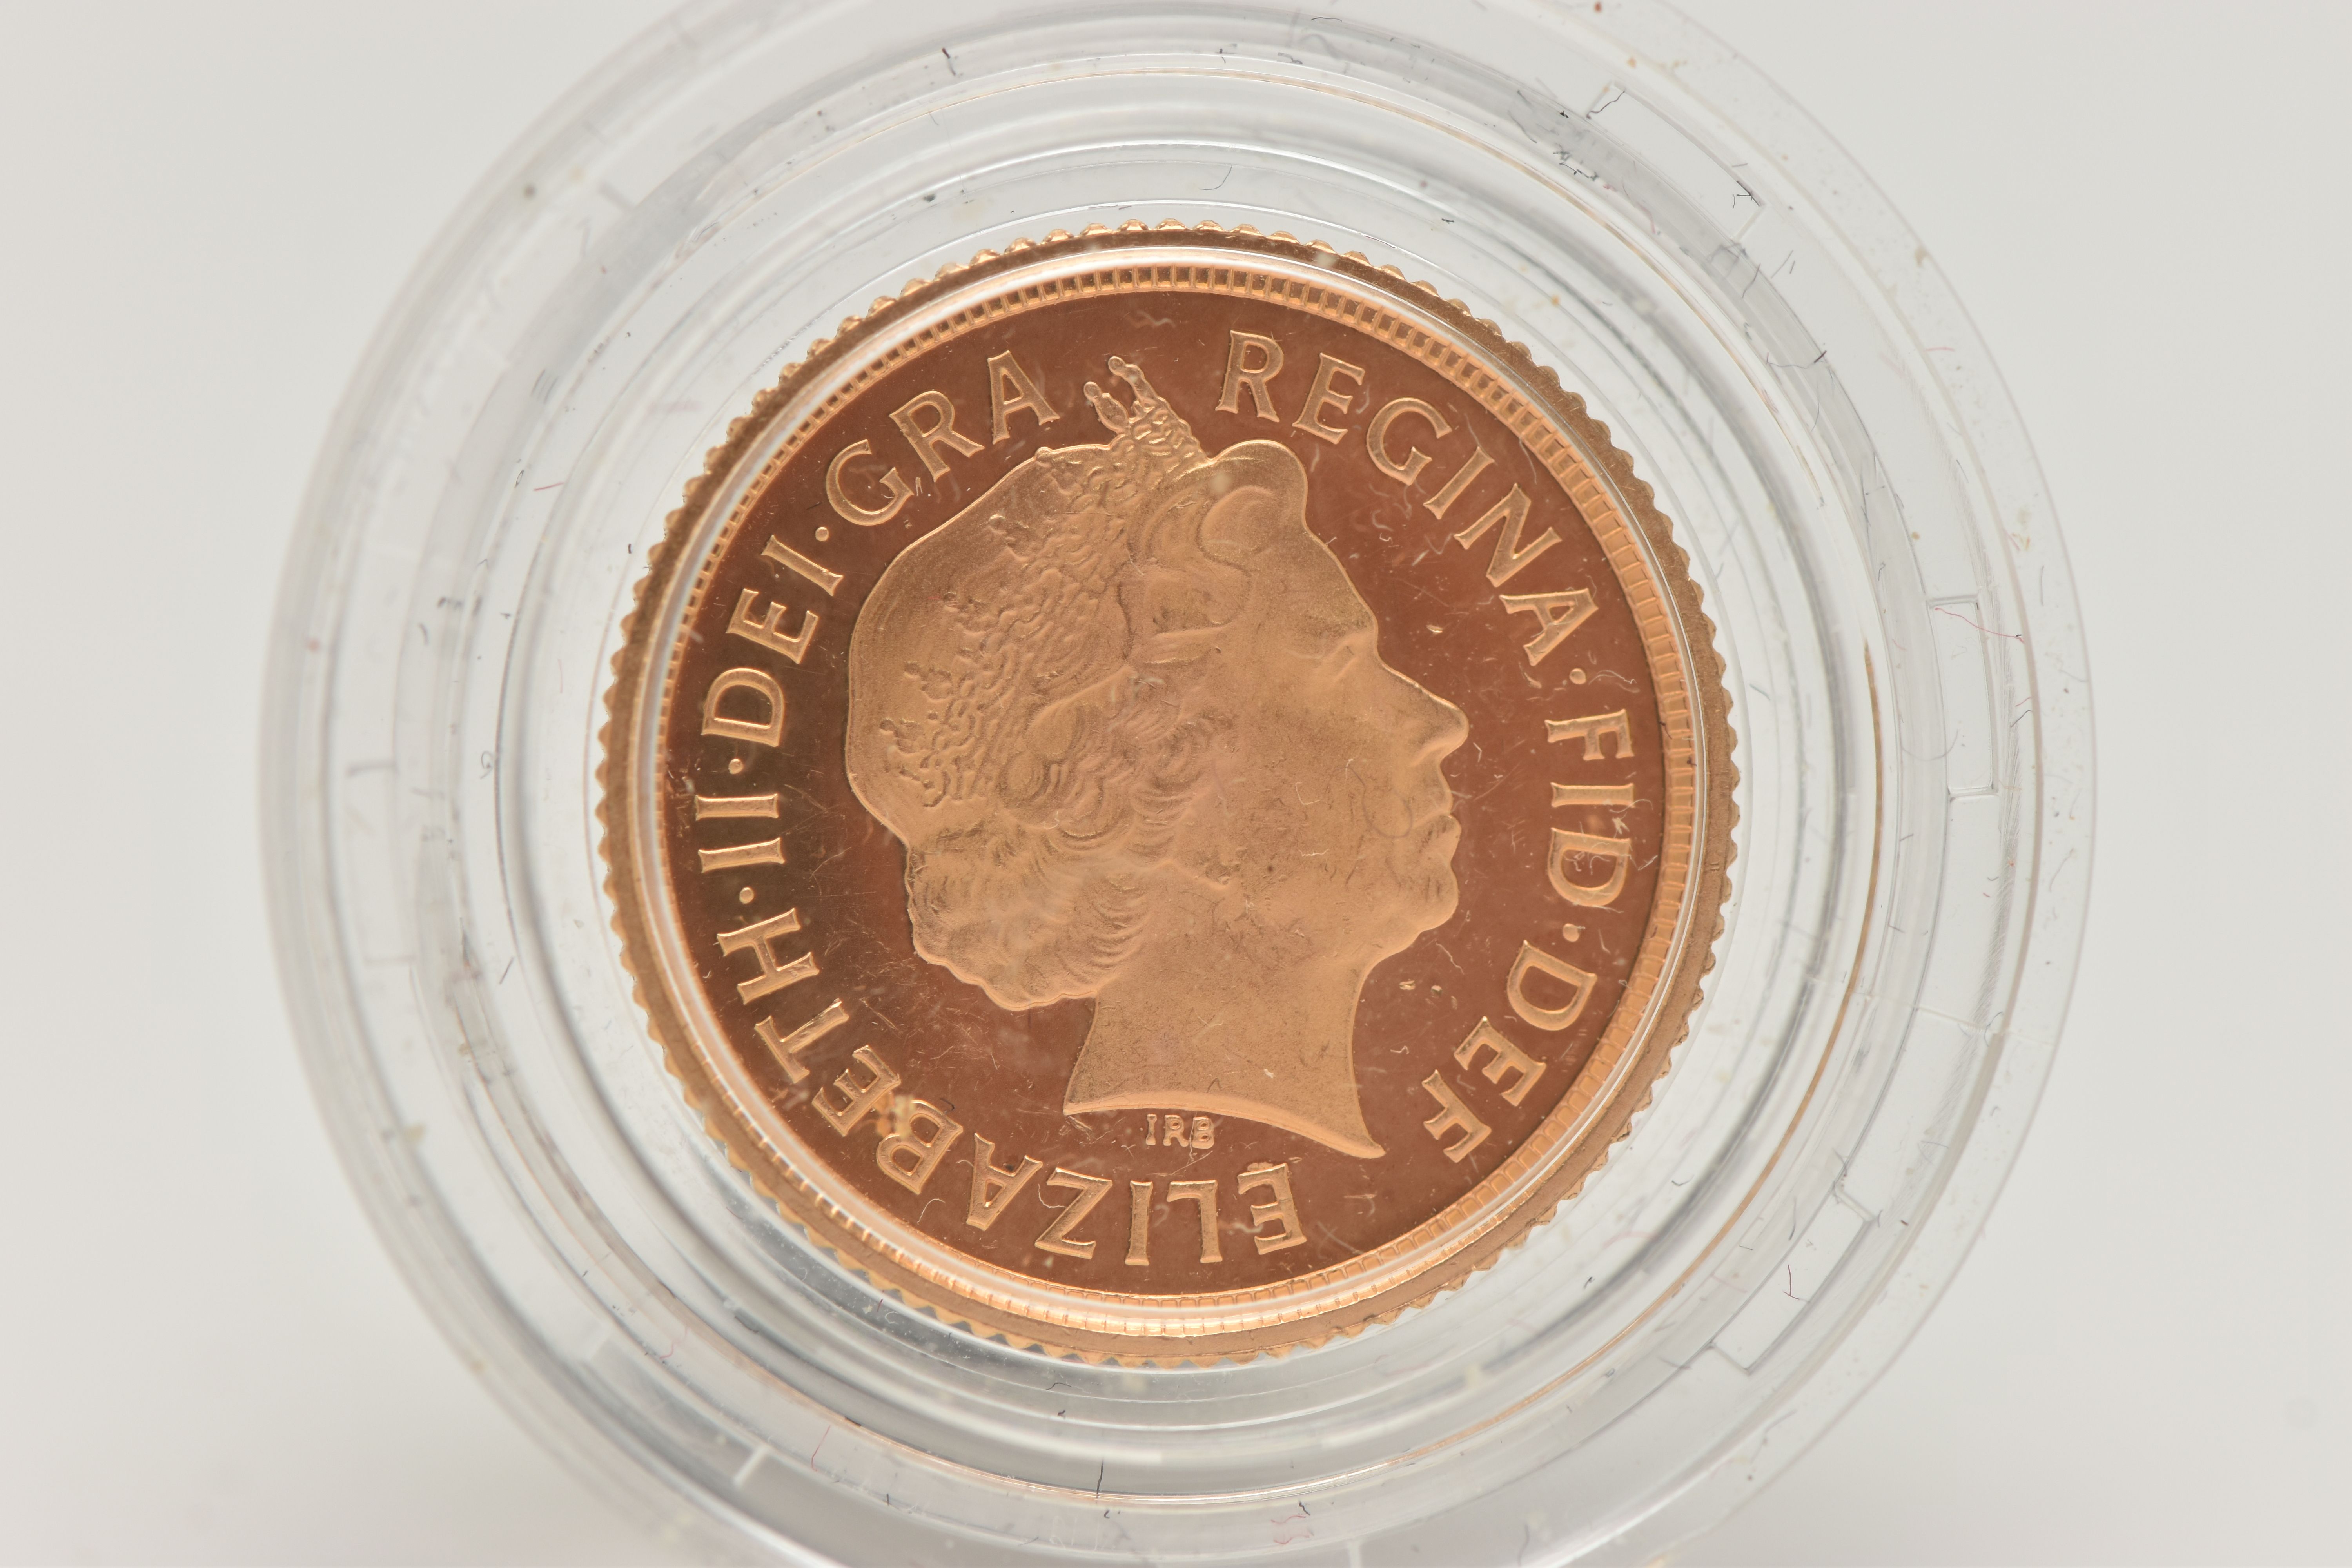 A 22CT GOLD PROOF HALF SOVEREIGN COIN ELIZABETH II 22ct 2009, 3.99 grams, .916 fine, 19.30mm - Image 2 of 2